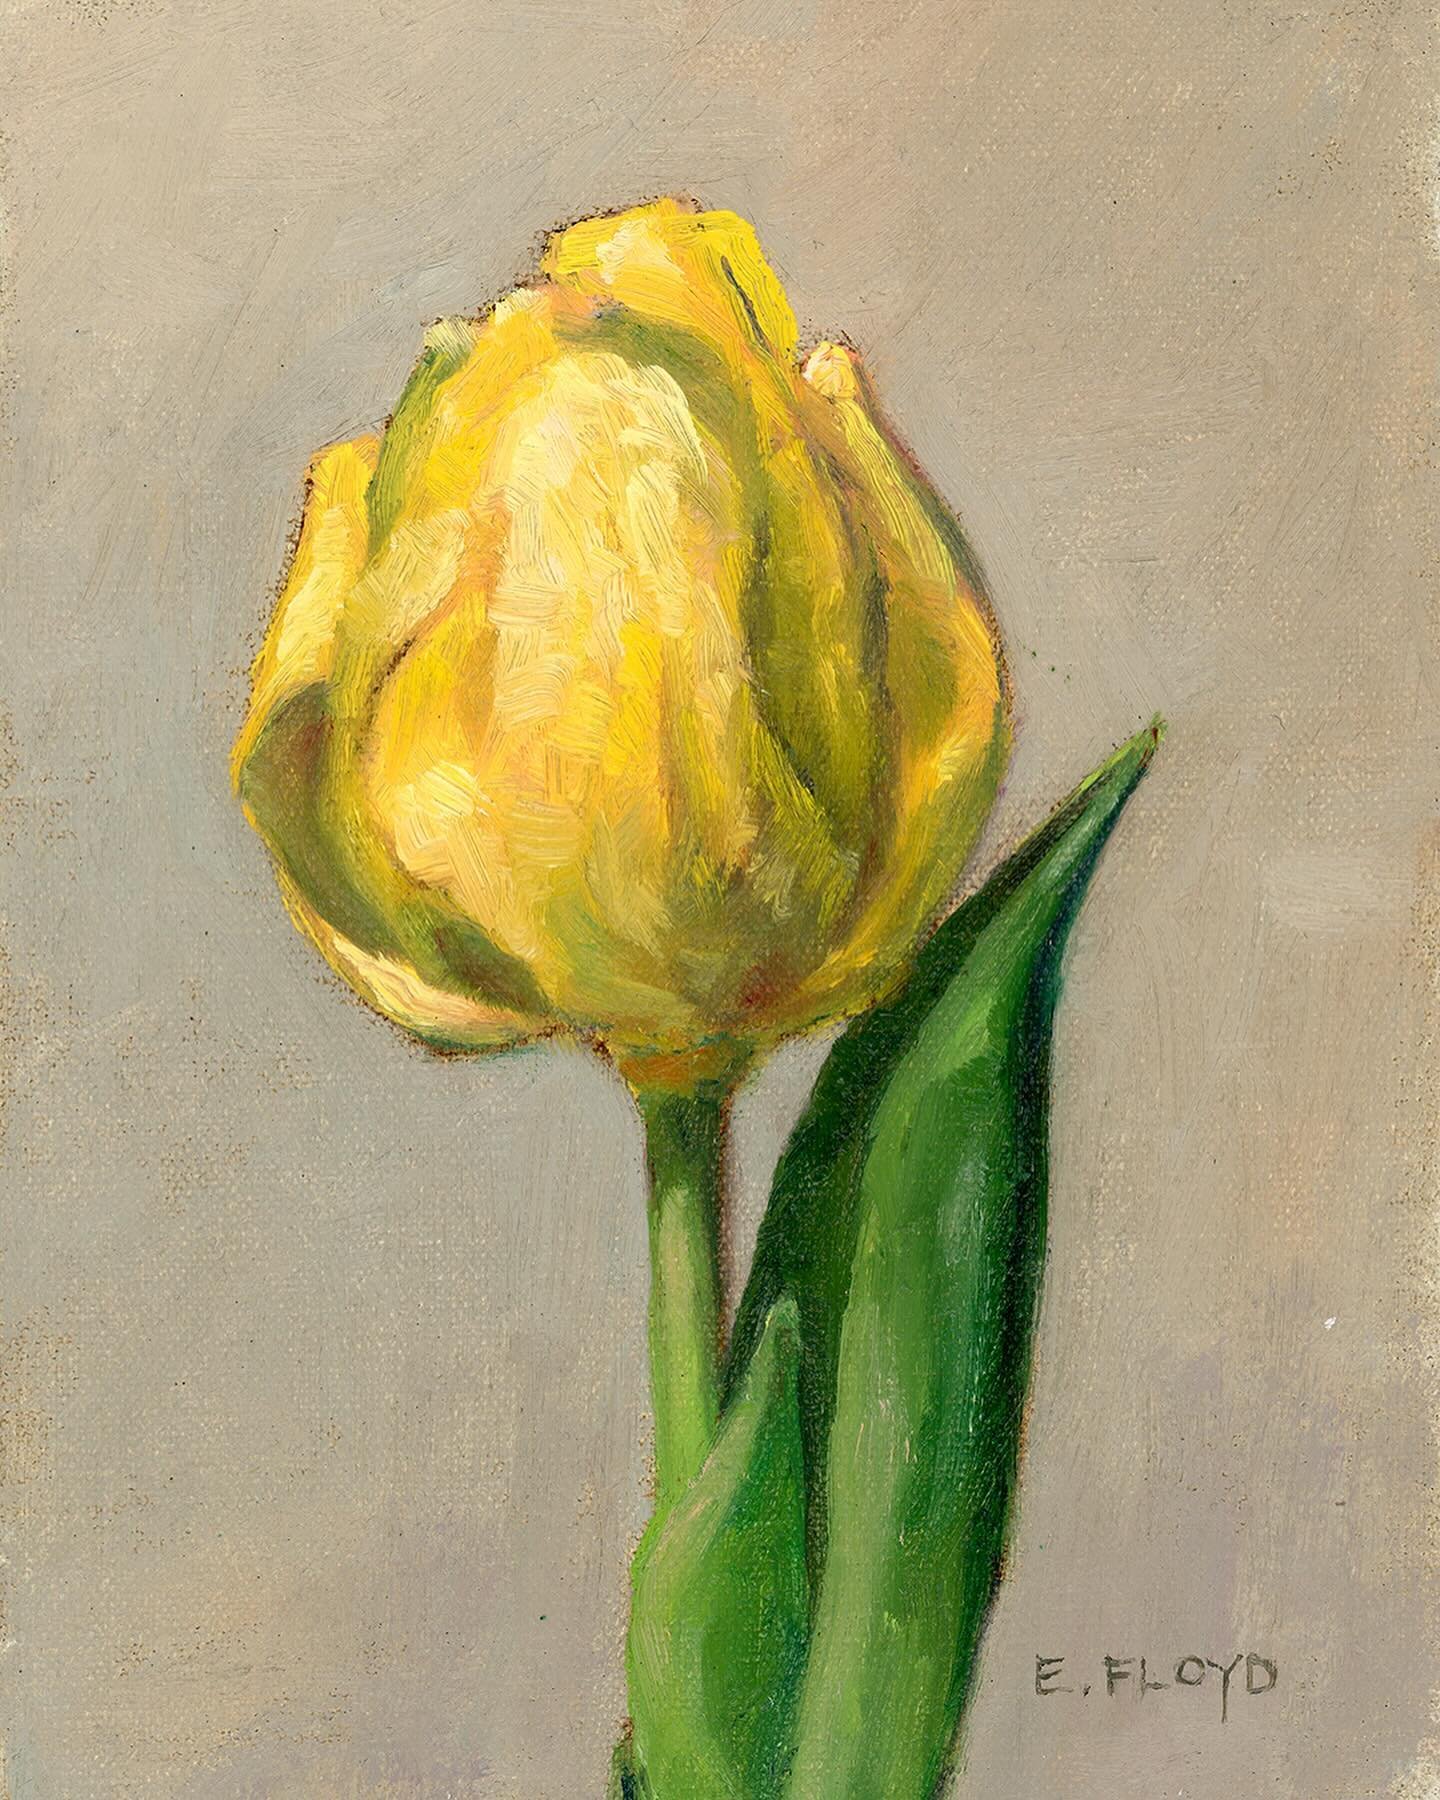 Tulip Season is one of my favorite times of the year. ⁠
⁠
Yellow Tulip, 8x6 inches, oil on linen panel, AVAILABLE on my website, link in profile⁠
⁠
#elizabethfloydart #tulippainting